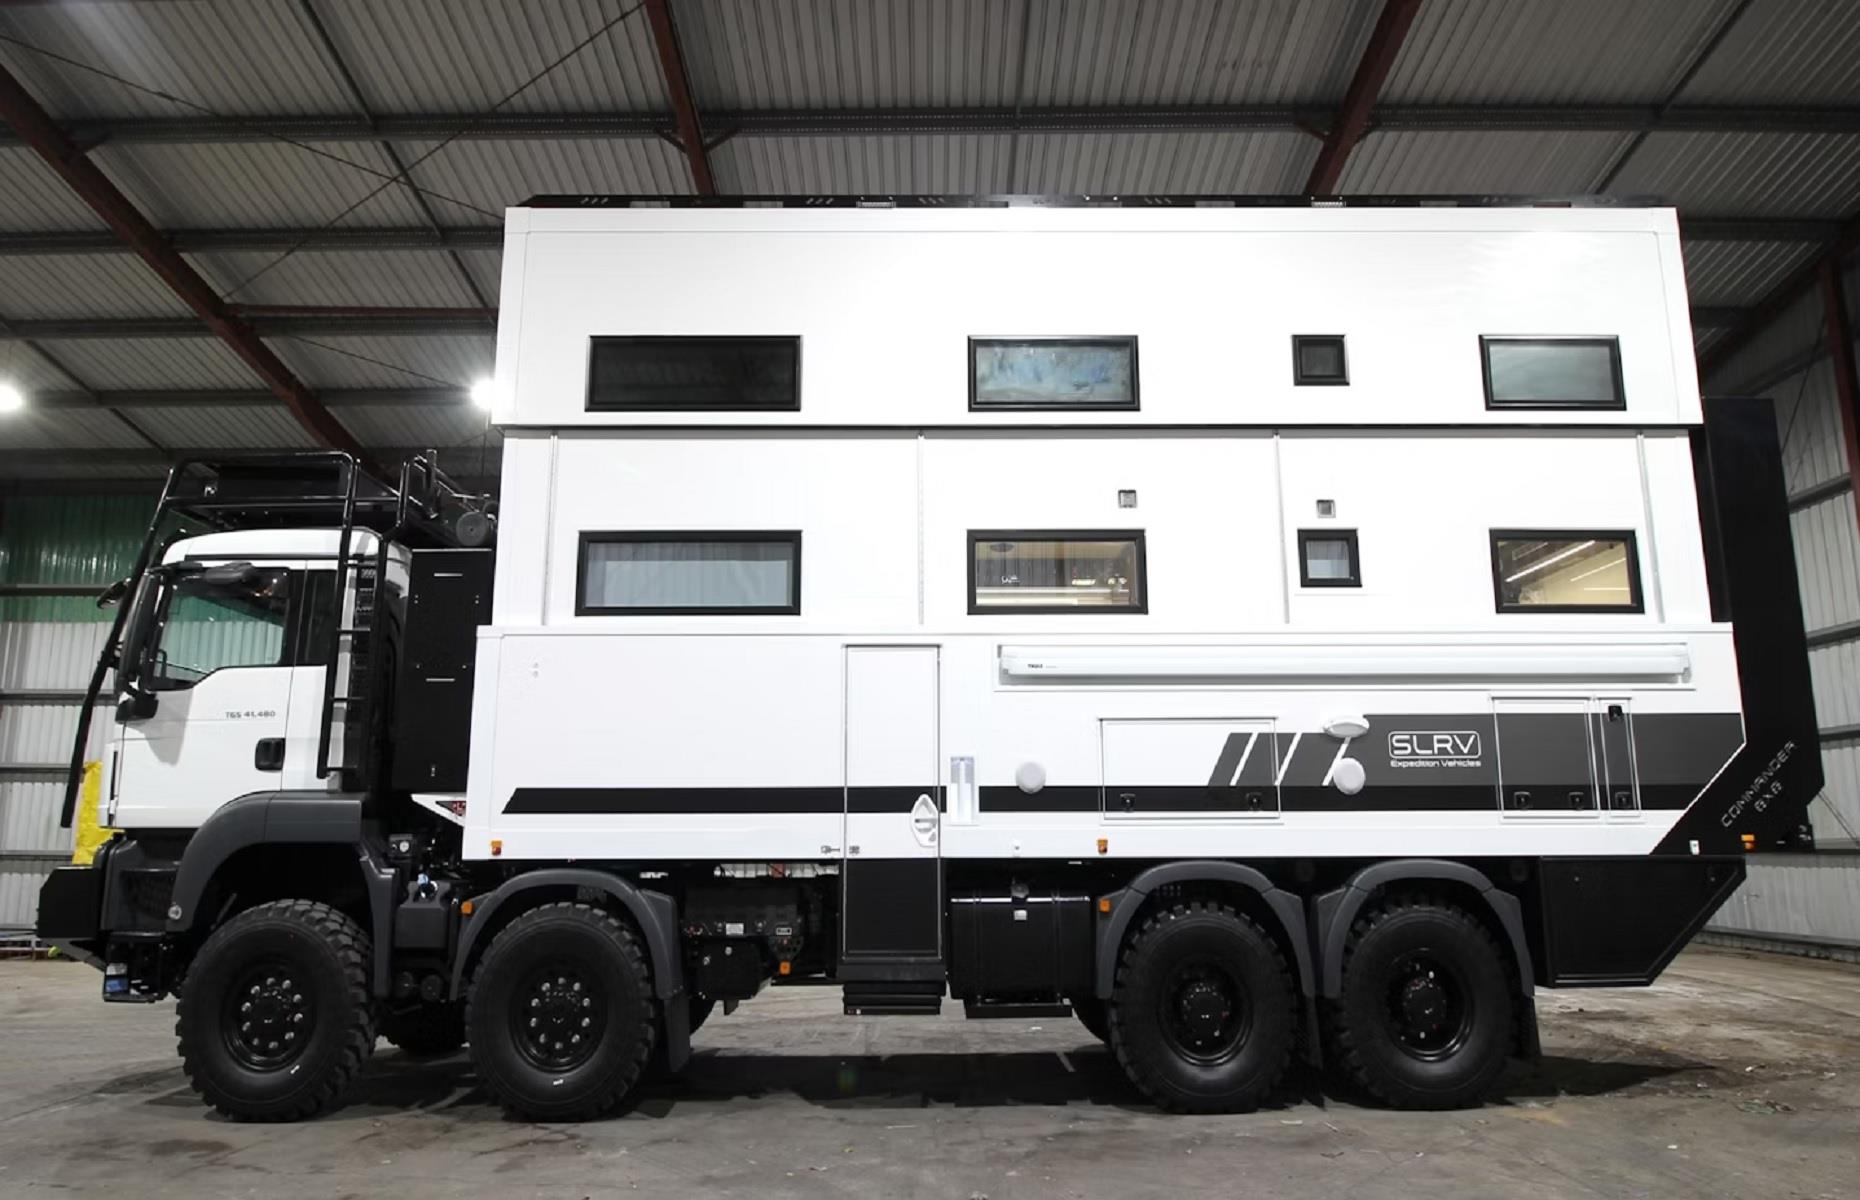 <p>Known for designing custom RVs that can go anywhere, SLRV Expedition created the luxury all-terrain motorhome, <a href="https://slrvexpedition.com.au/products/commander-8x8/">Commander 8x8</a>. Encompassing two stories, the home on wheels is built on the chassis of a military truck and has been described by the company as 'unstoppable'. It comes with an innovative, retractable floor that can be lifted and lowered at the touch of a button. When raised, roof space is created in a hidden bedroom, where six single beds can be found. When lowered, the vehicle is ready for the road!</p>